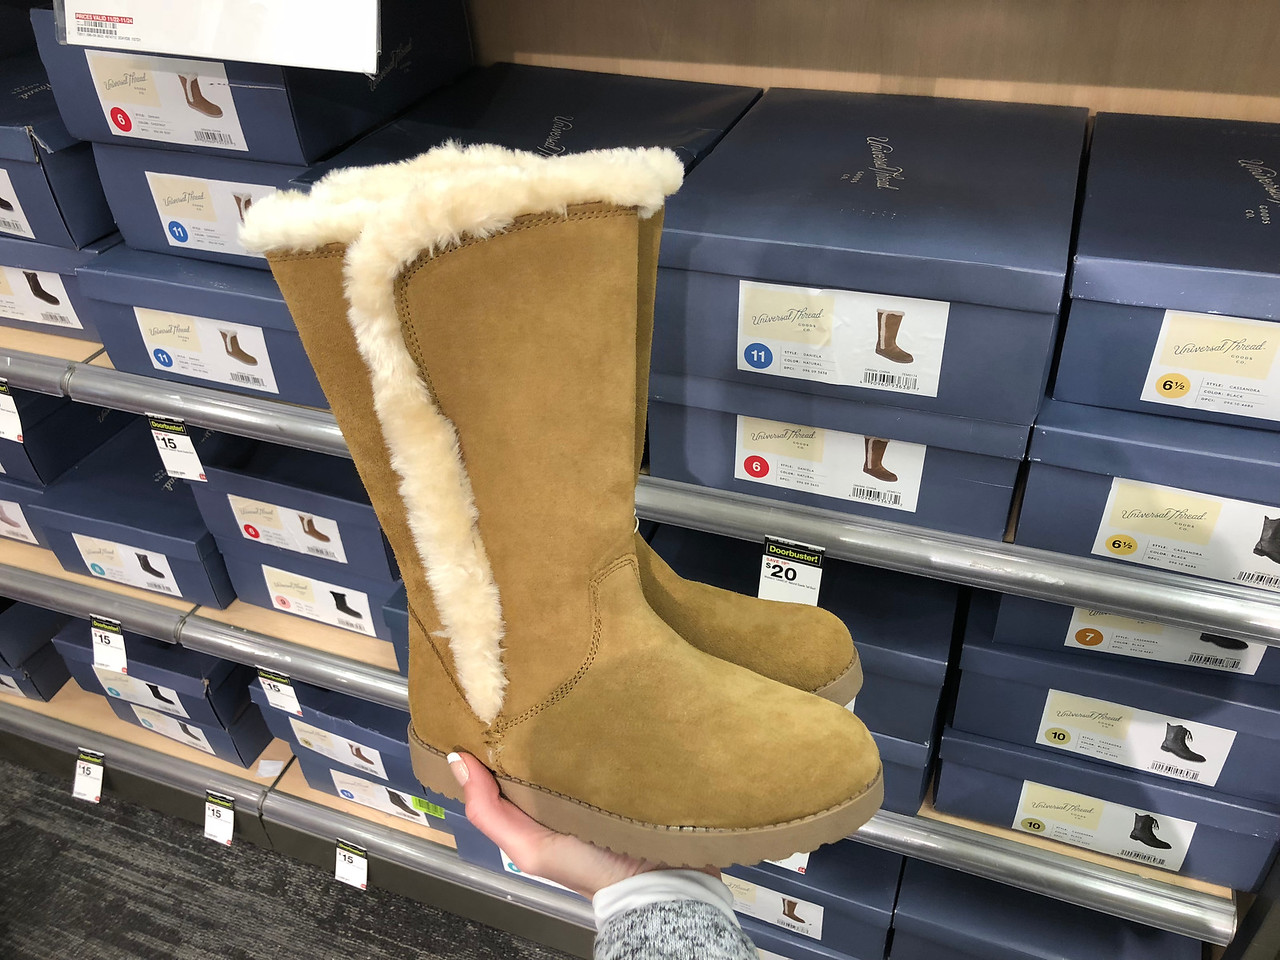 target fur lined boots